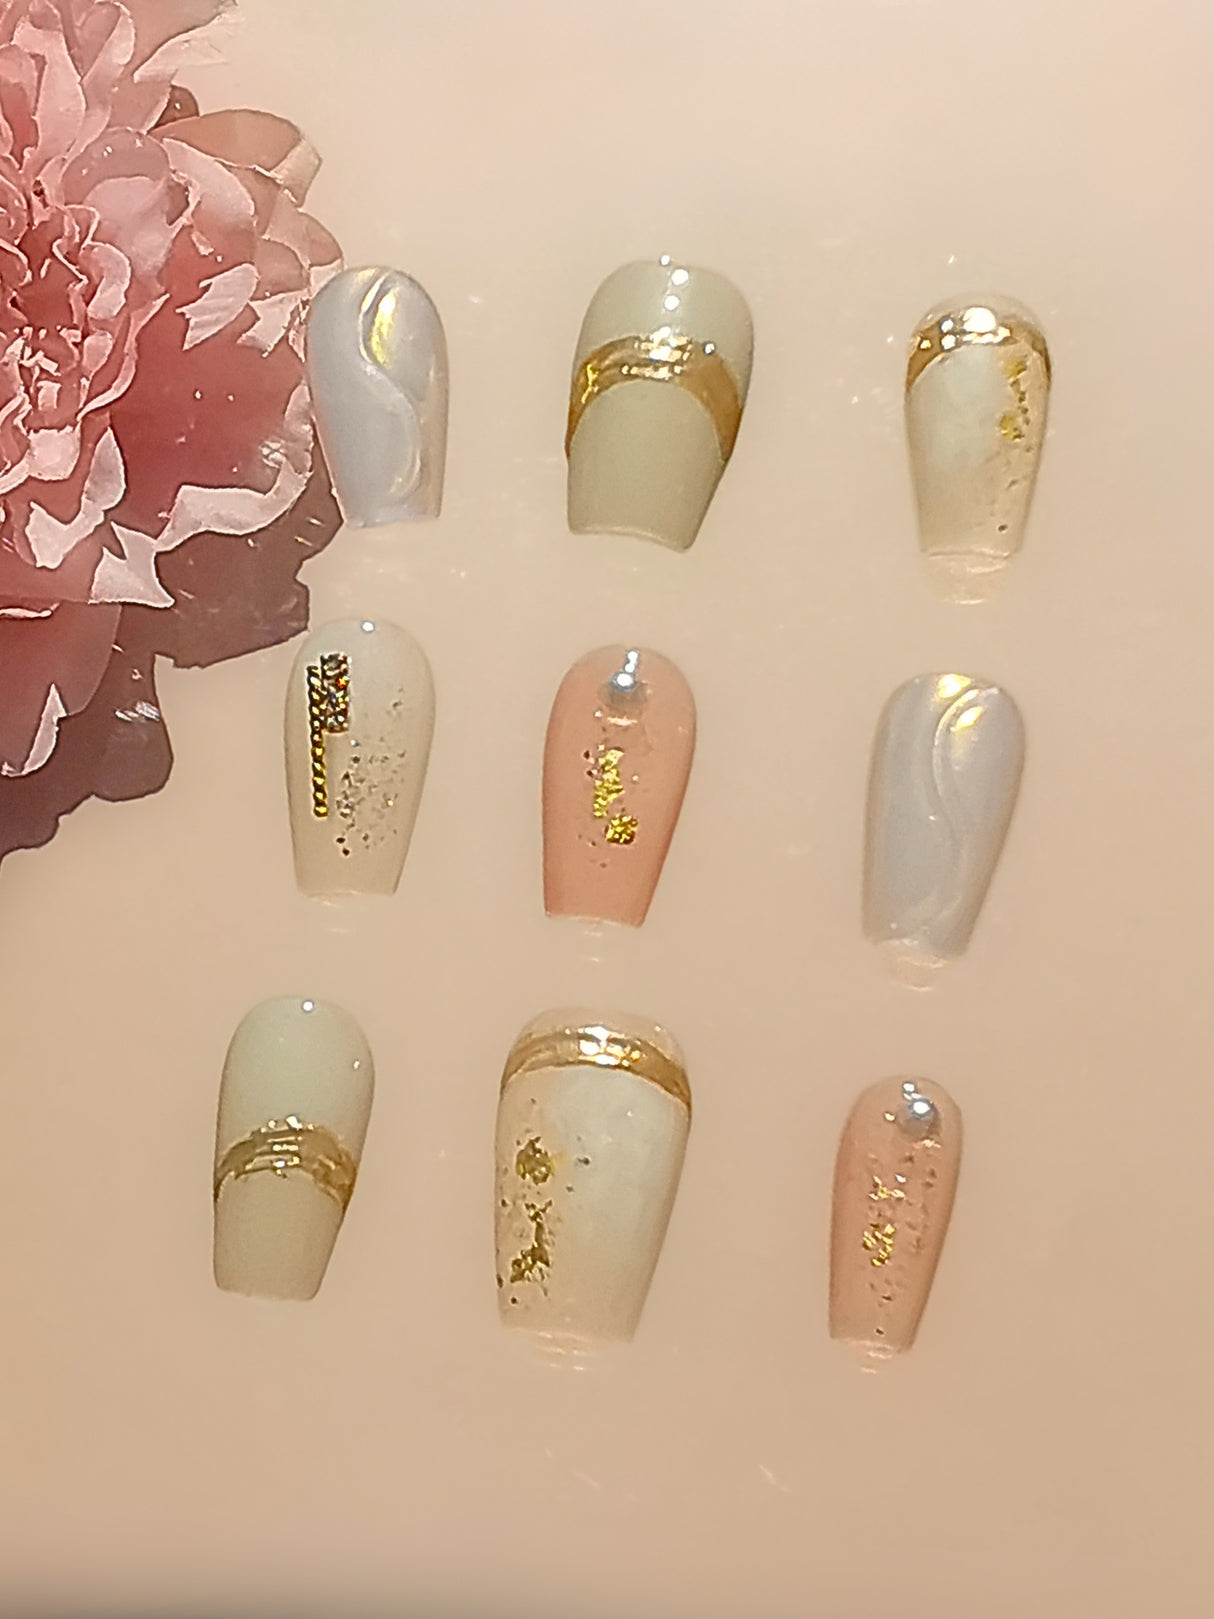 These press-on nails featuring a soft pastel color scheme, gold accents, marbled textures, 3D embellishments, and a squared-off shape with a glossy finish.